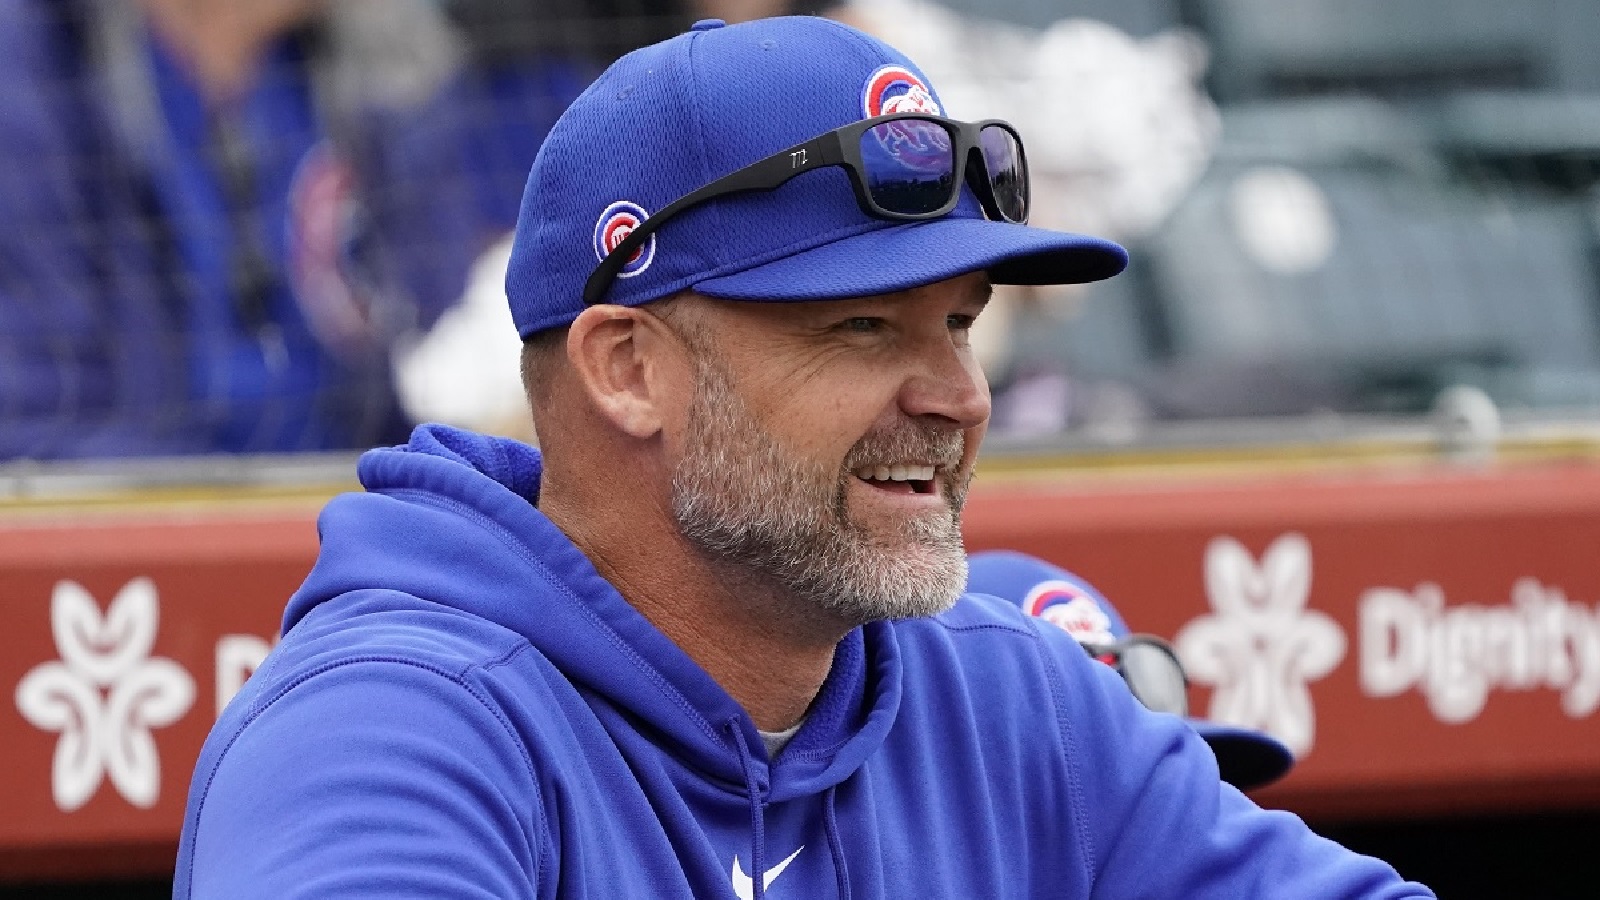 Cubs to trade one of last remaining players from World Series team?